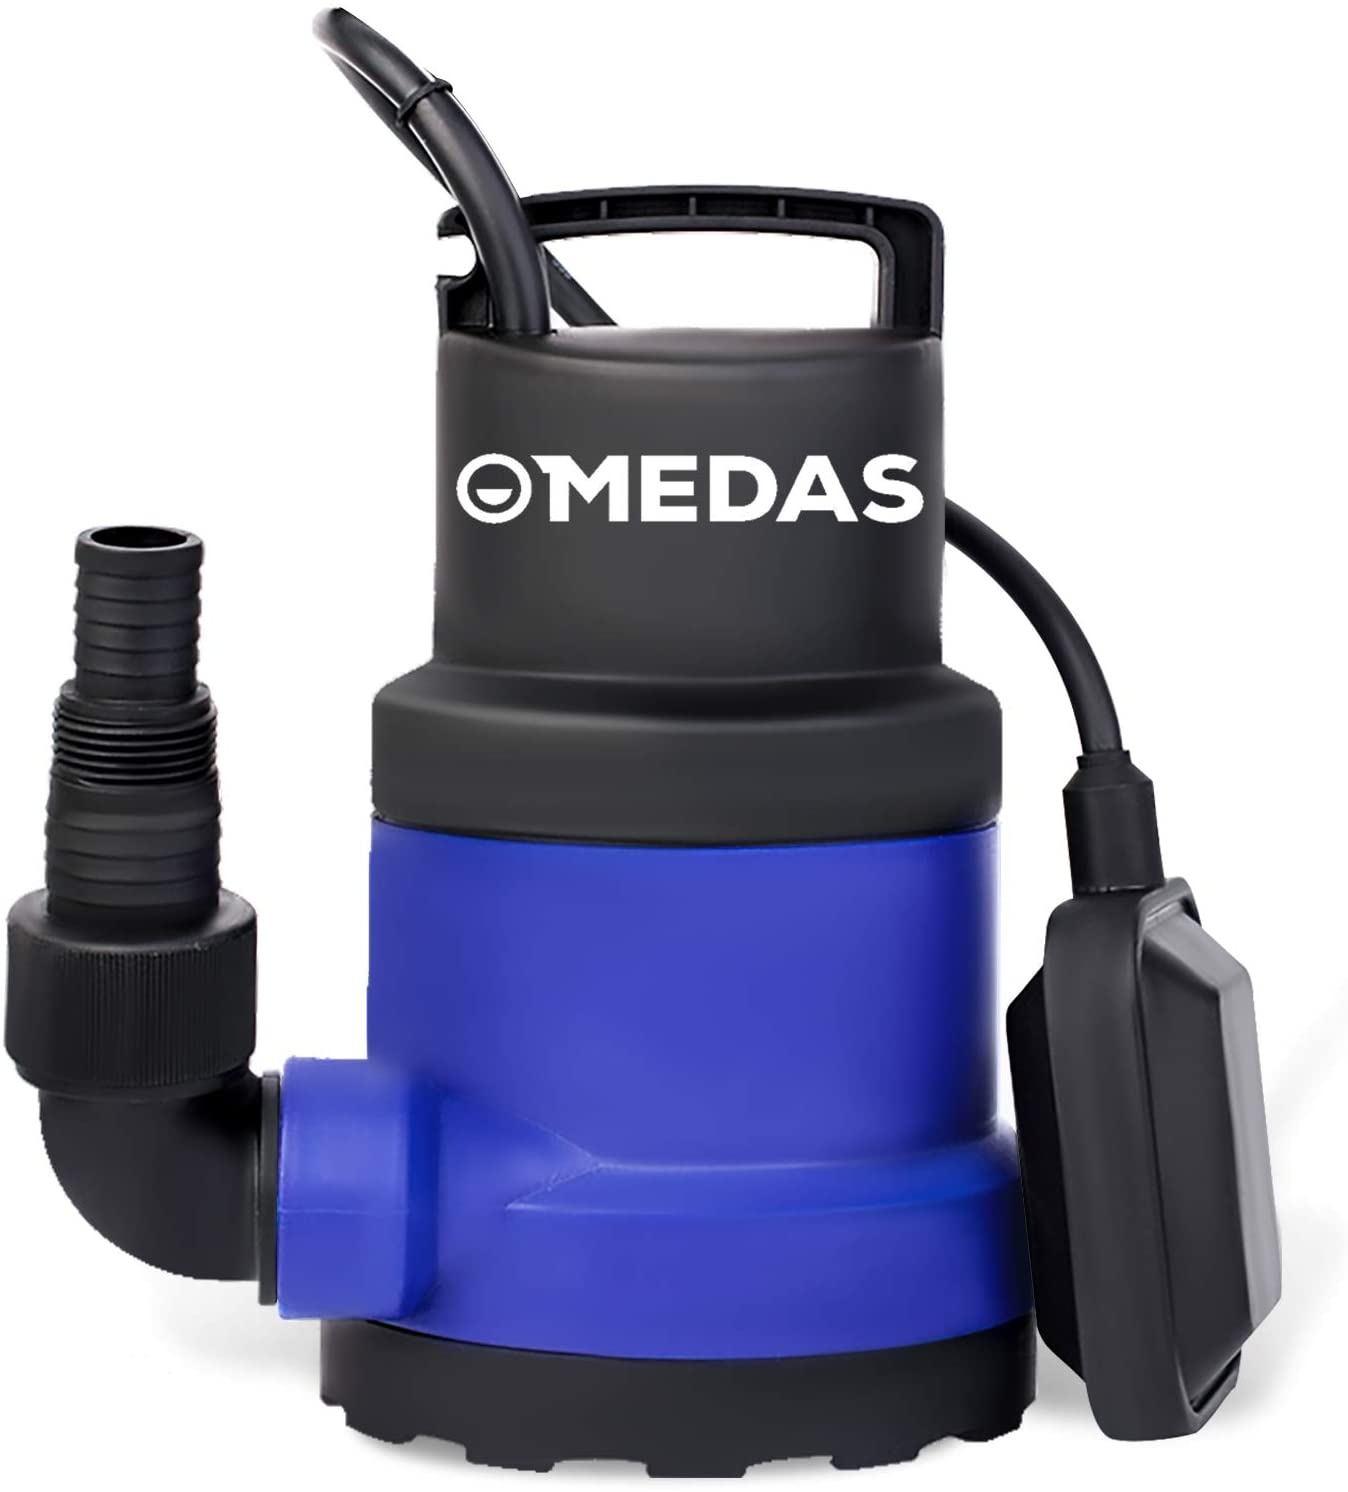 Mighty-mate Submersible Sump Pump